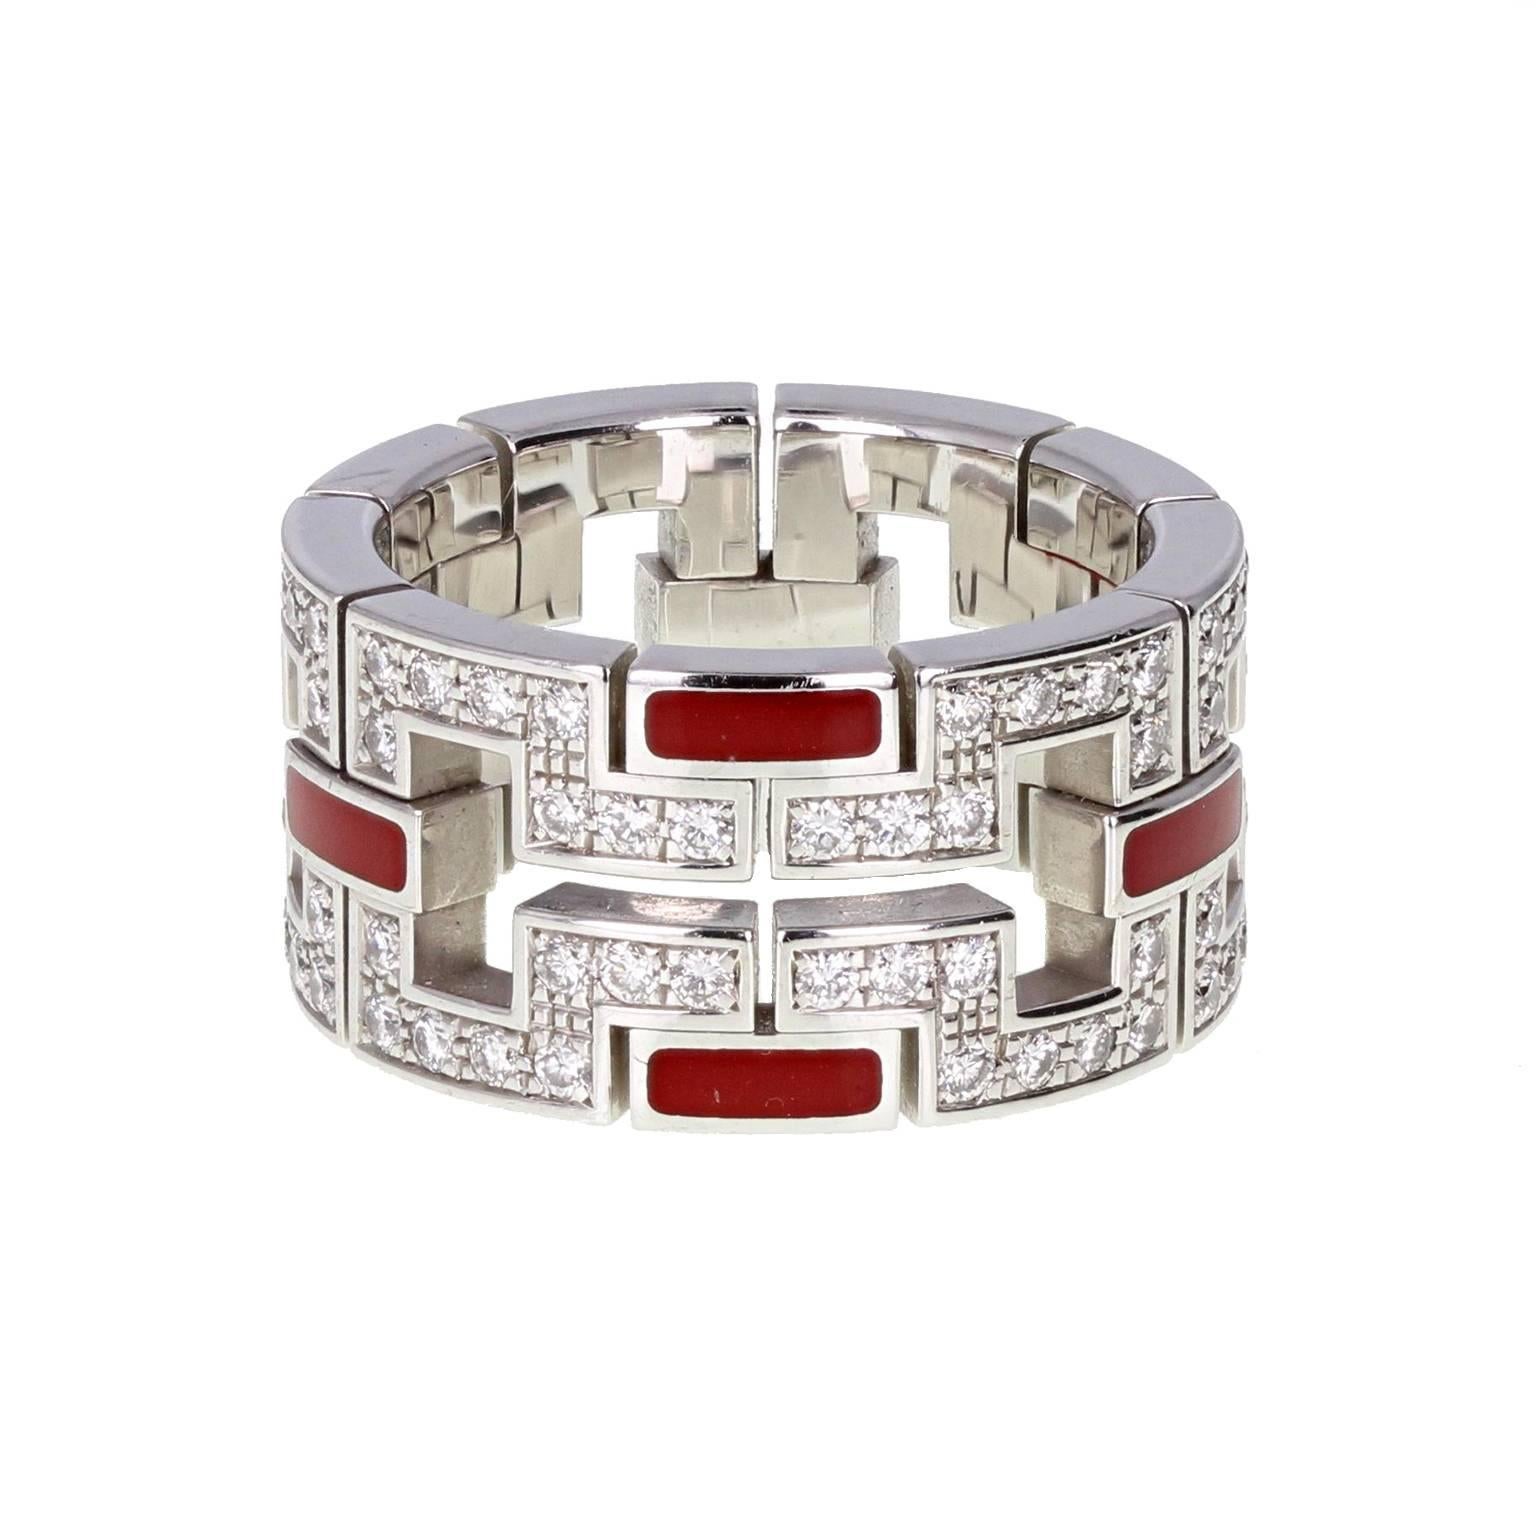 A rare and fine quality diamond set band ring by Cartier from the Baiser du Dragon collection. A 10.5mm wide 18 carat white gold band in the typical Far East style of the Baiser du Dragon Cartier pieces. Pierced and pavé set with brilliant-cut